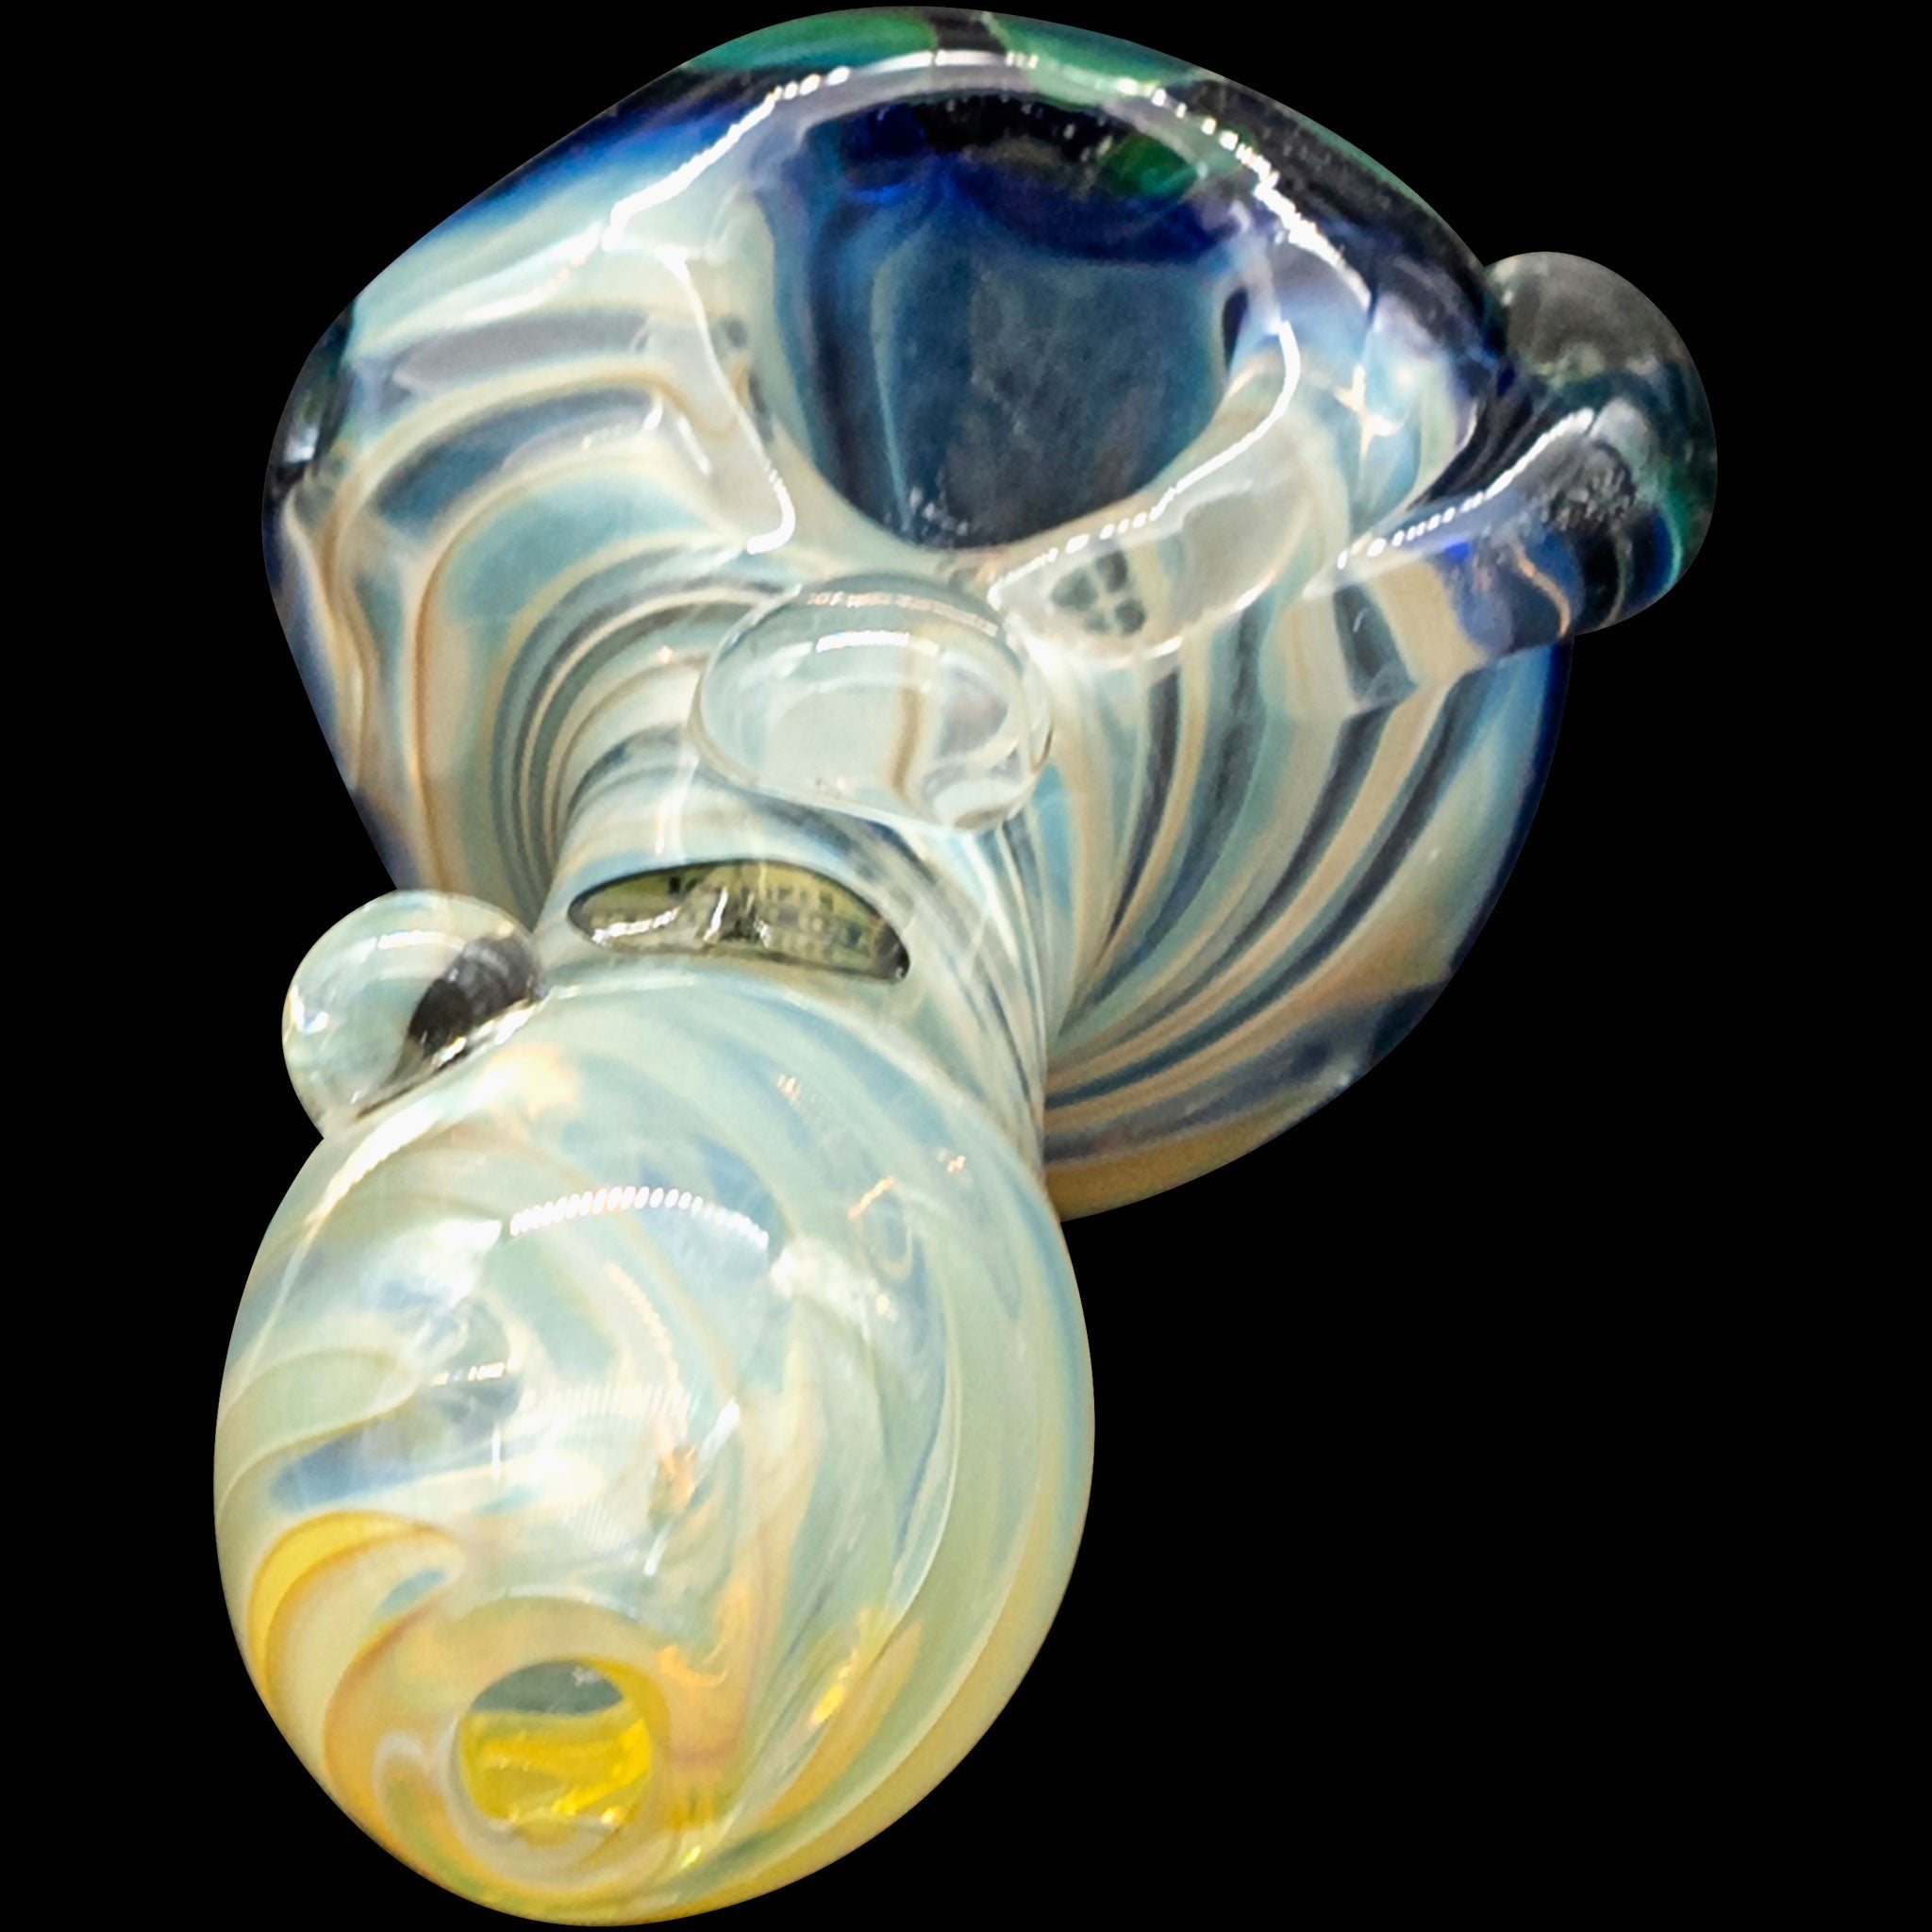 LA Pipes "The Hive" Honeycomb Color Changing Glass Pipe